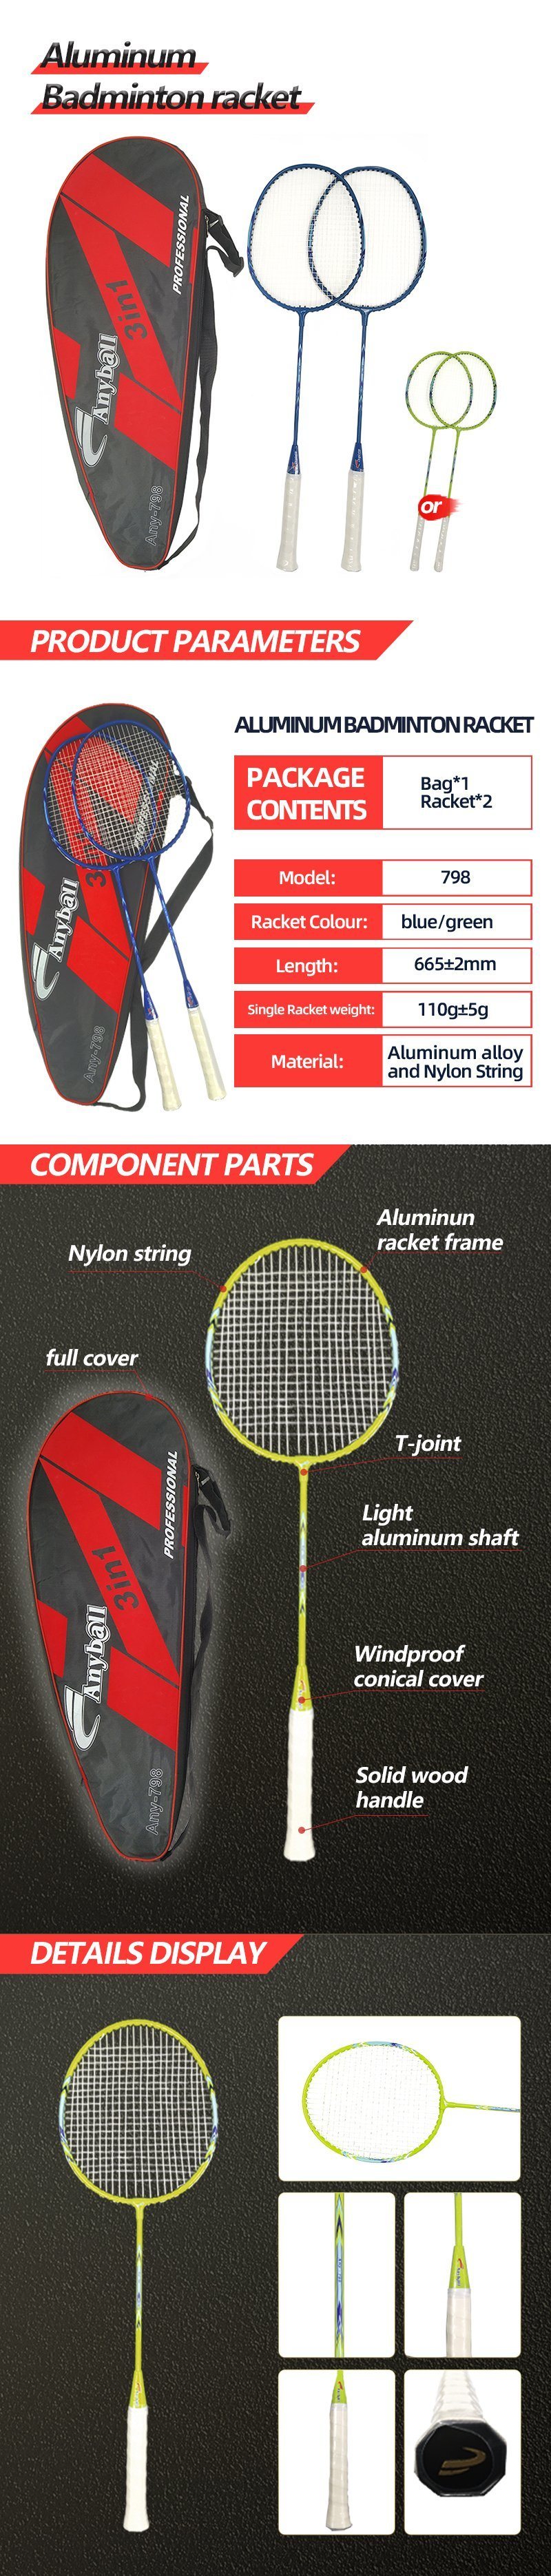 Anyball Brand Badminton Racket Good Quality and Good Durability 798 From Factory